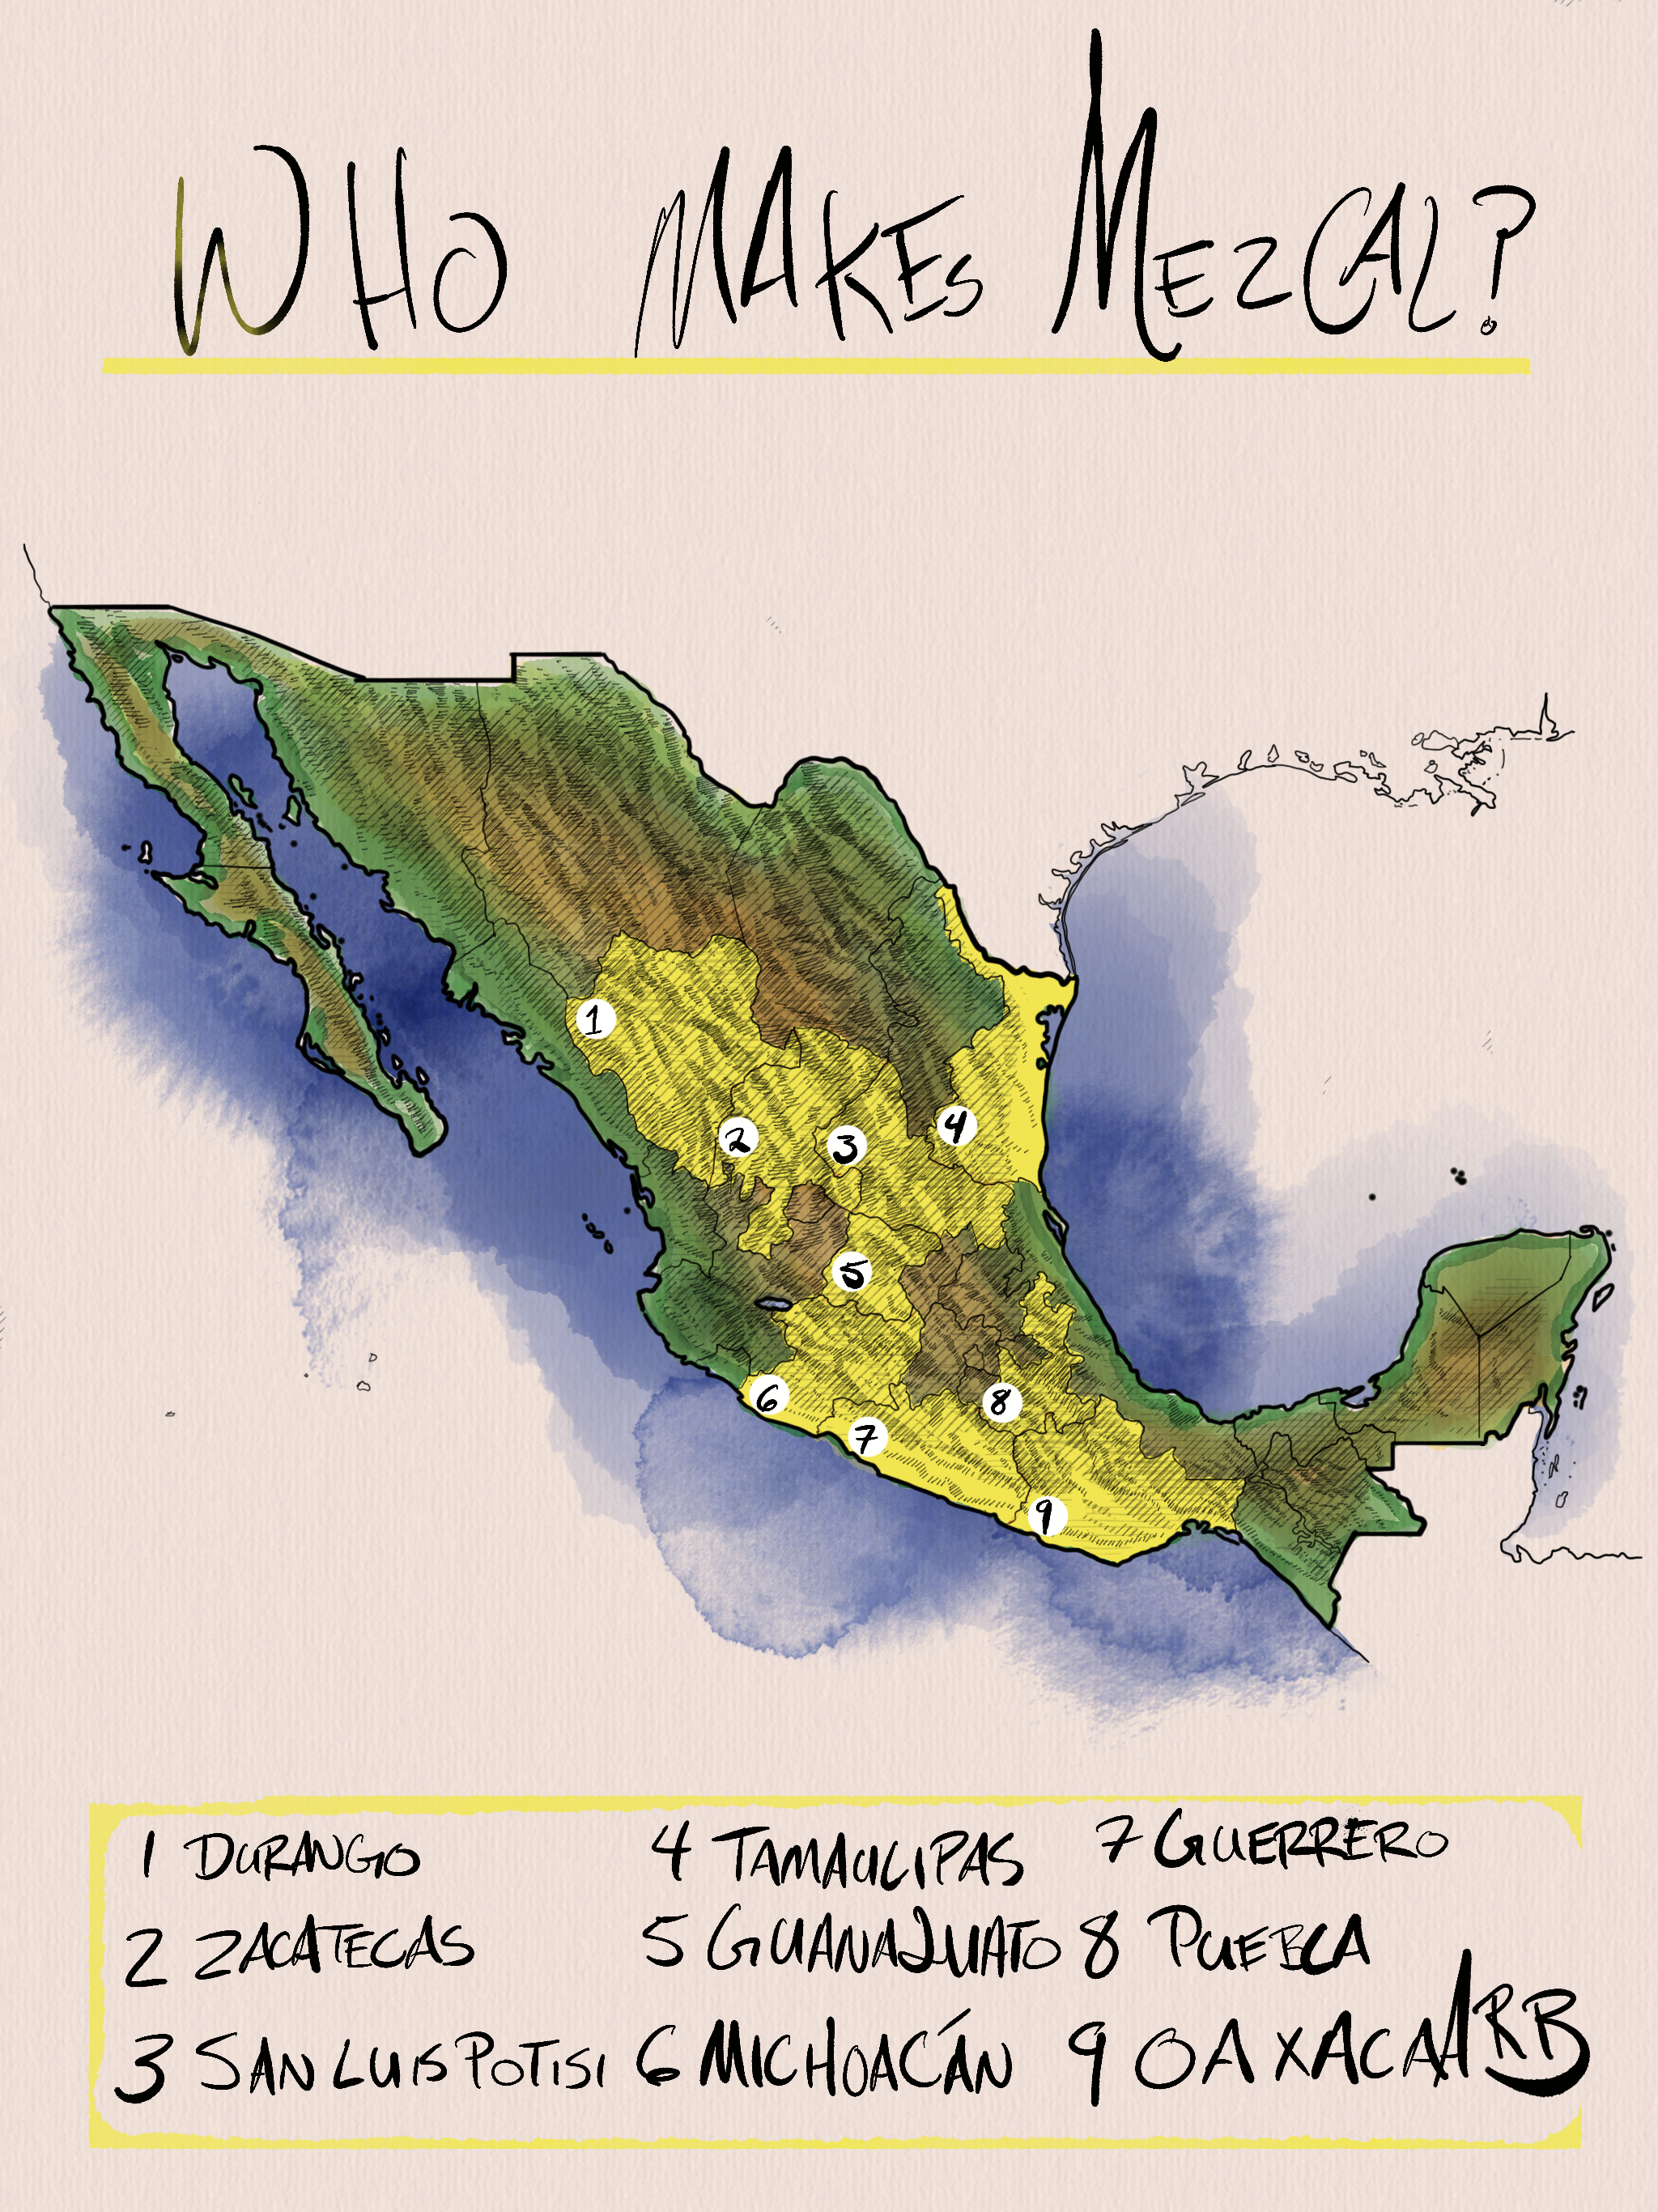  The nine Mexican States that make Mezcal. 